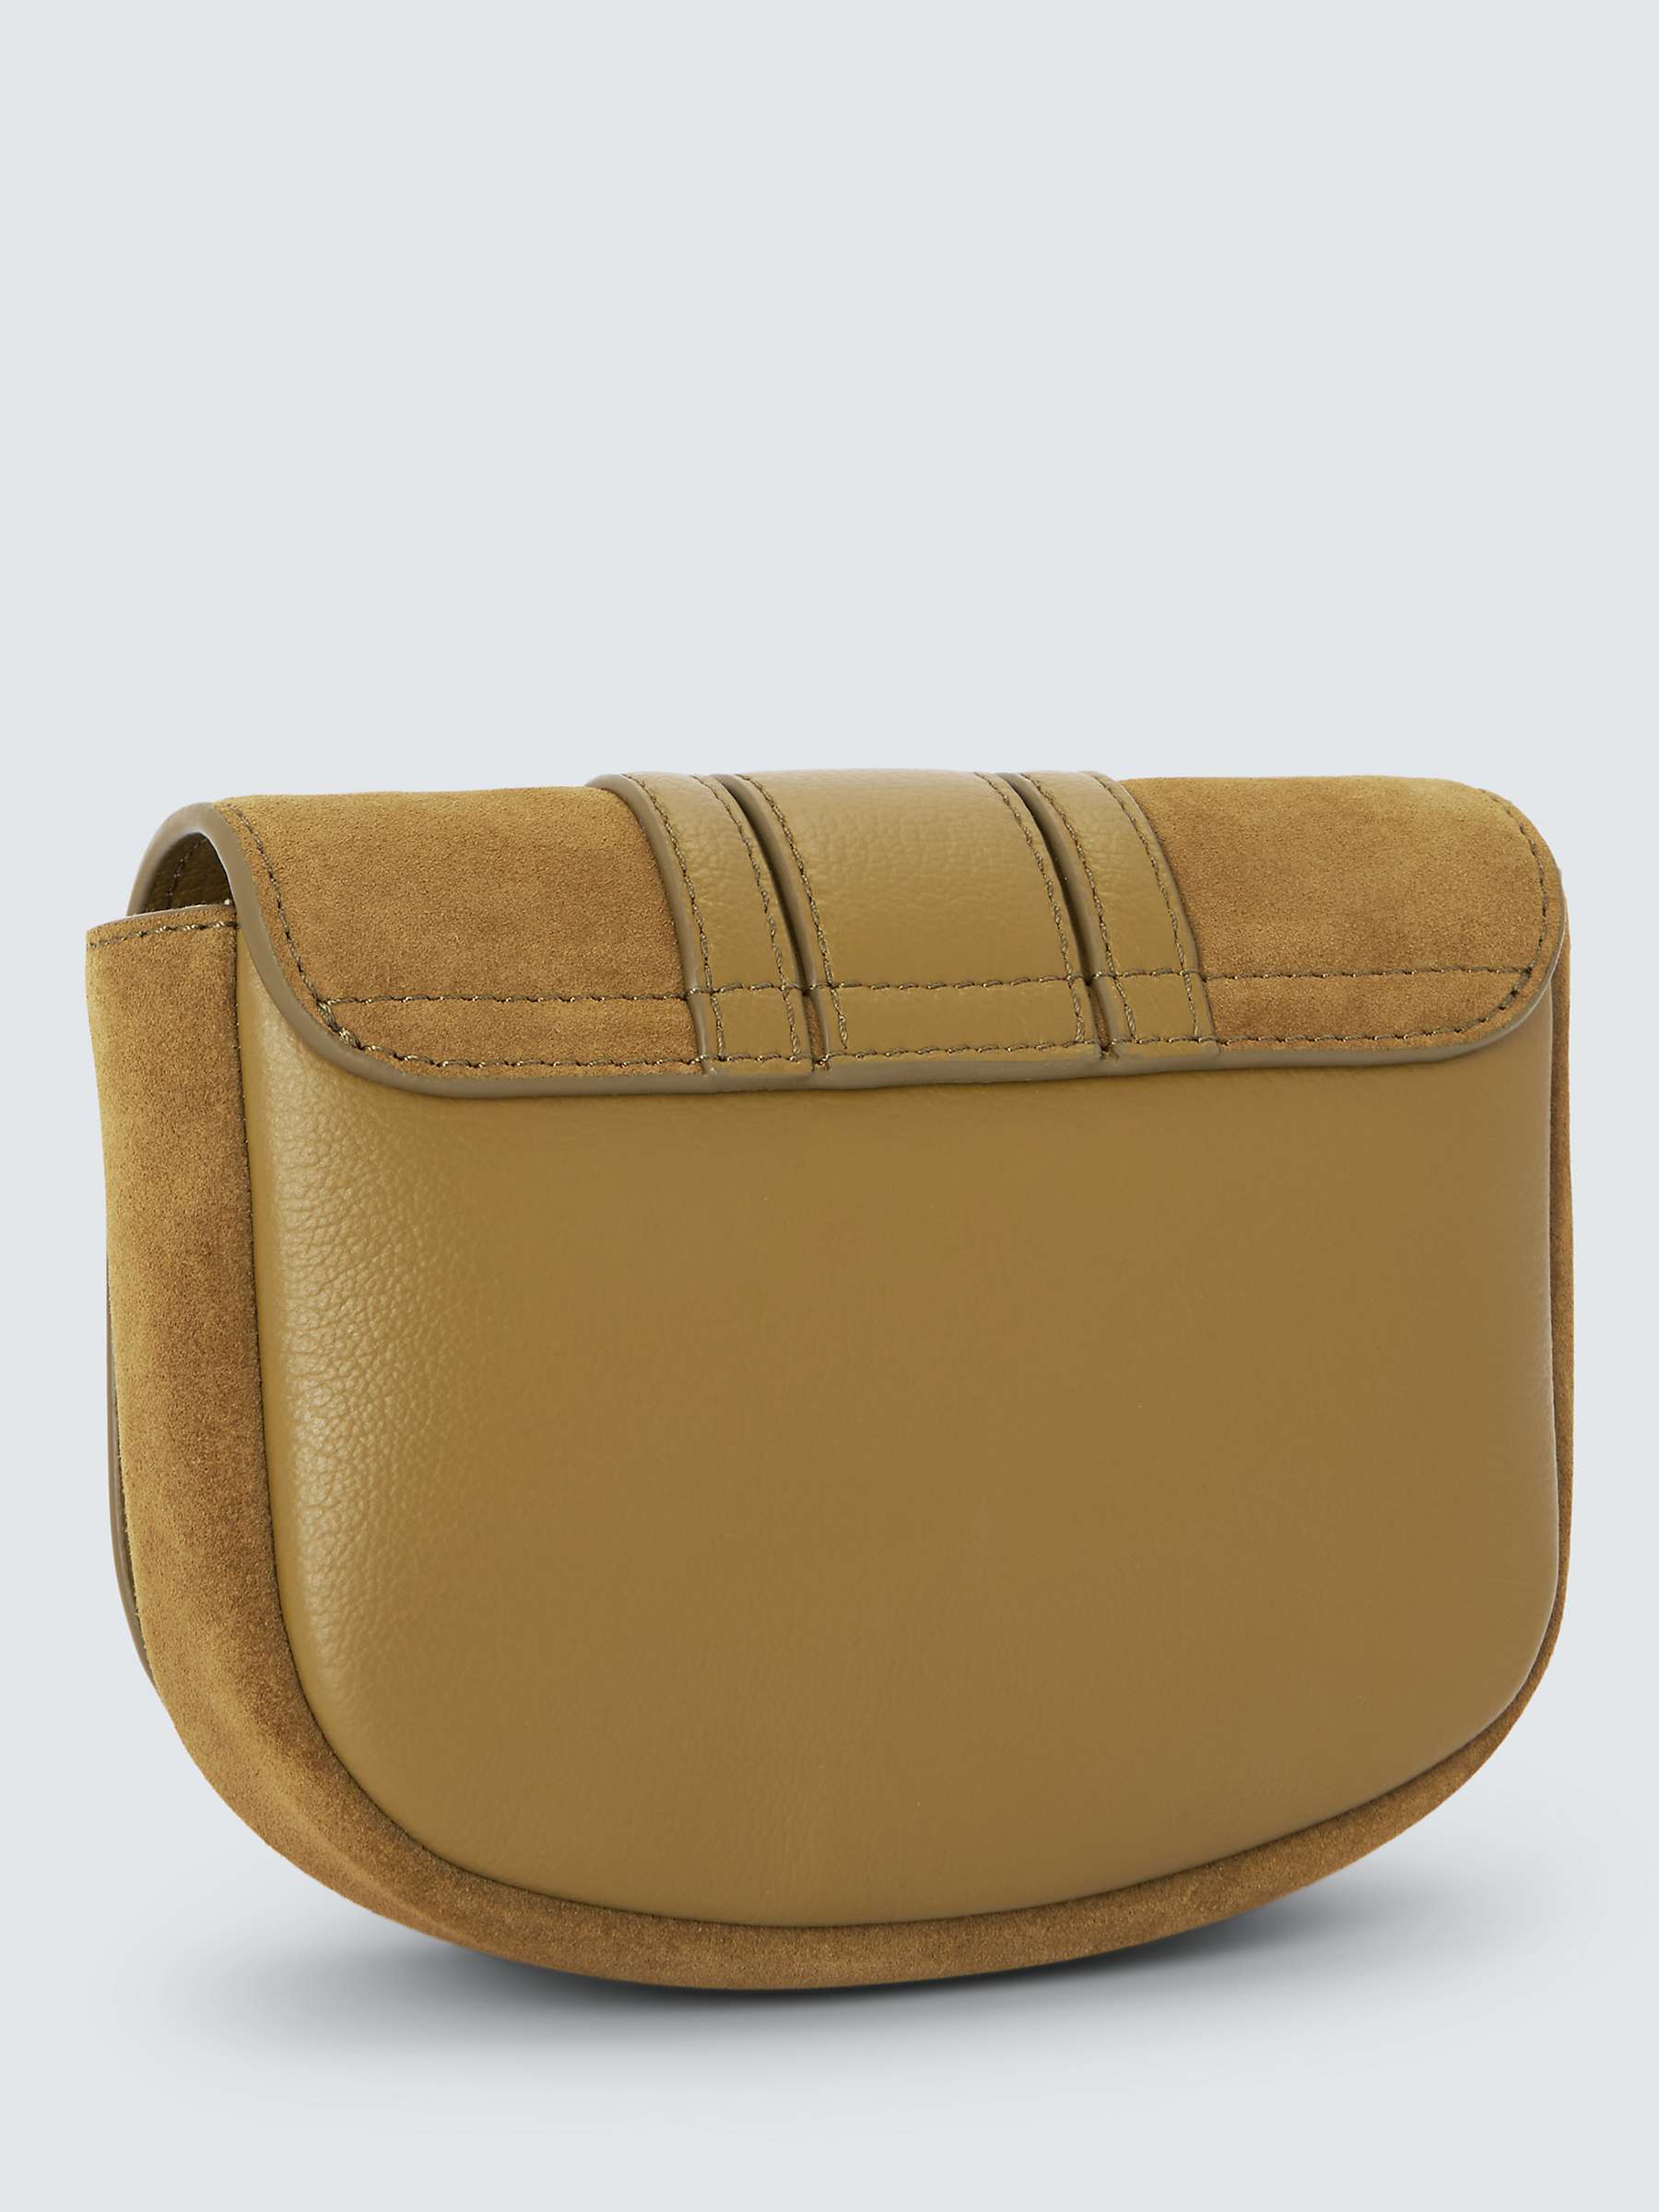 Buy See By Chloé Mini Hana Suede Leather Satchel Bag, Olive Online at johnlewis.com